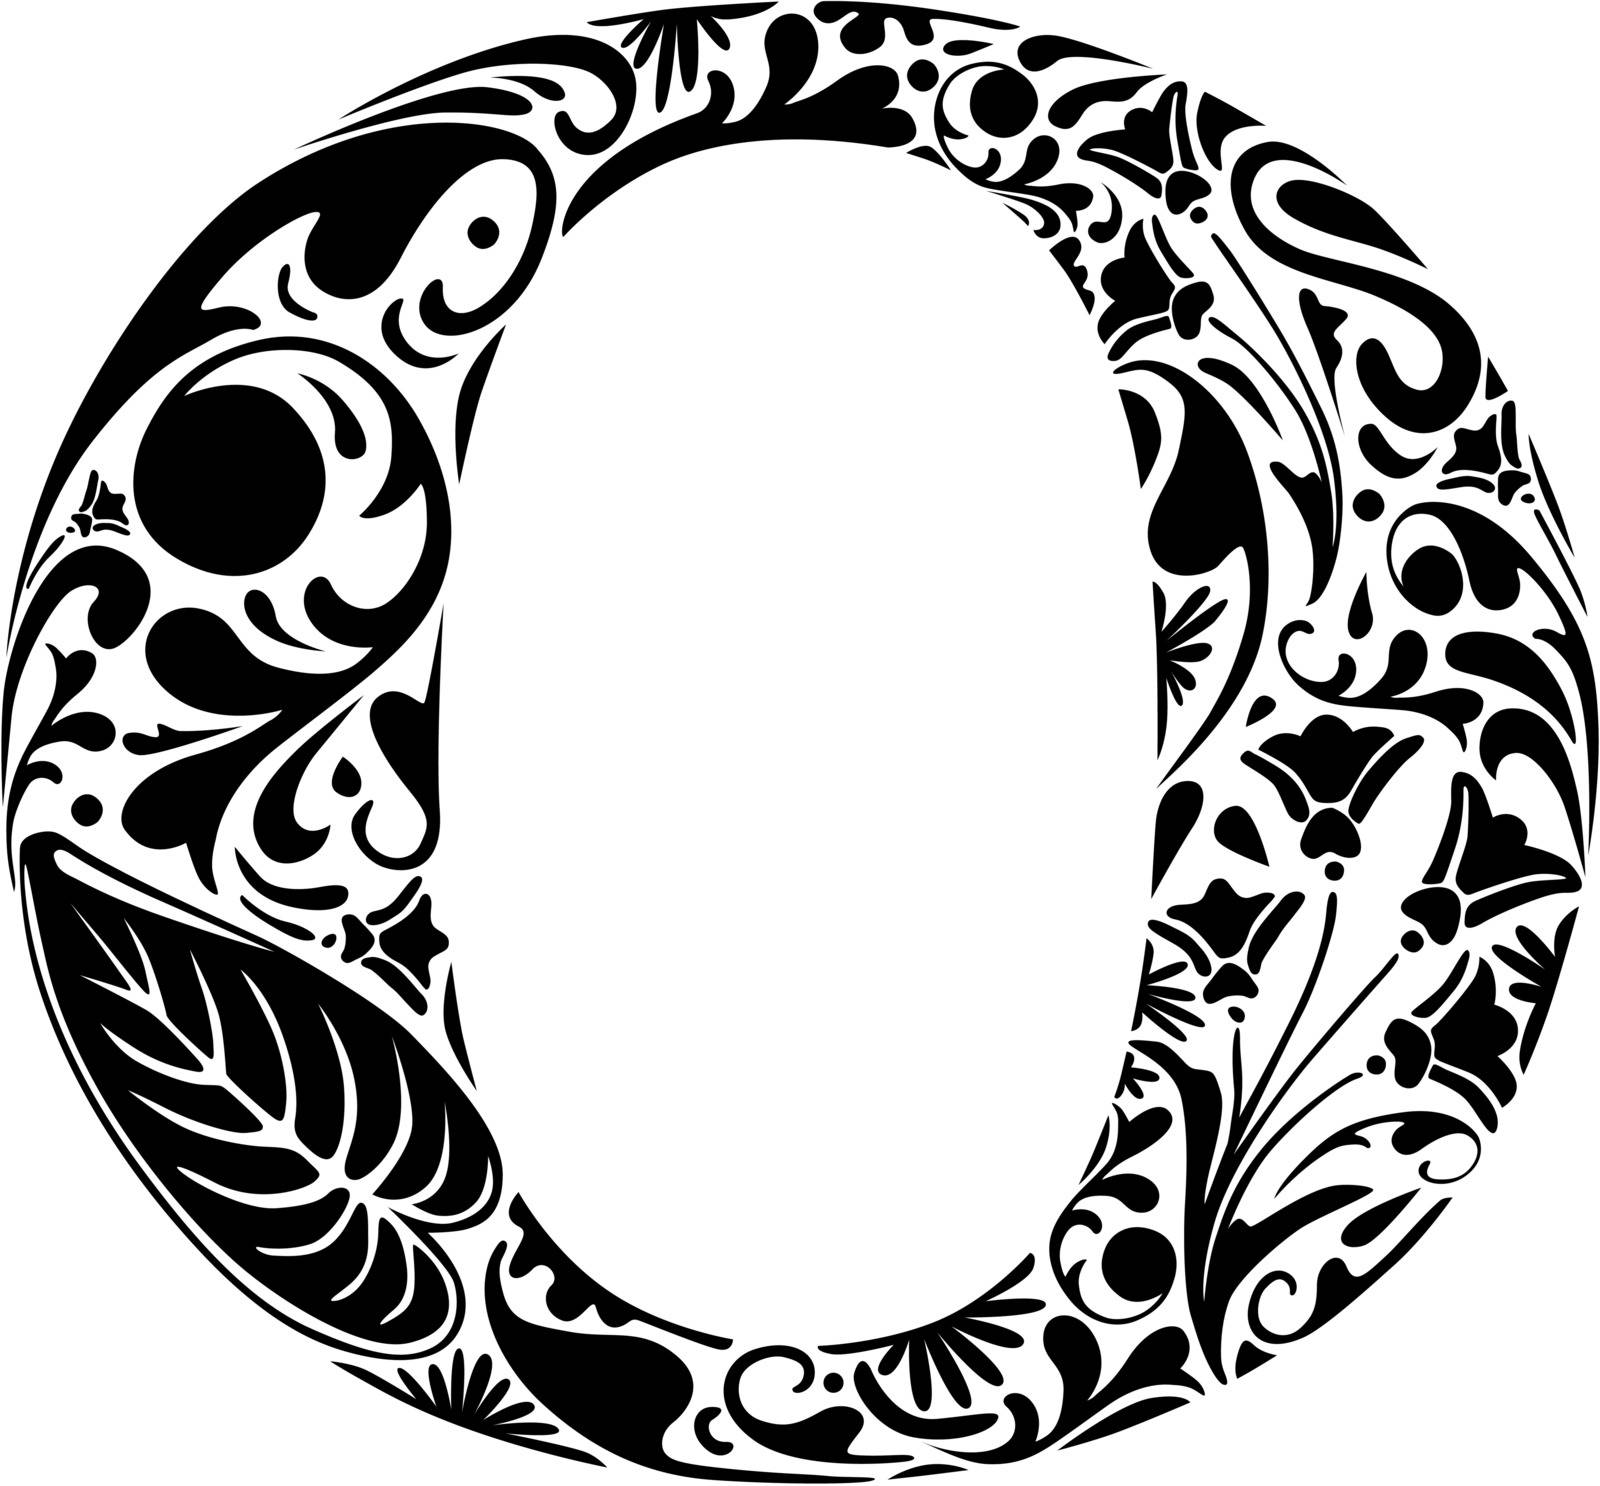 Floral initial capital letter O